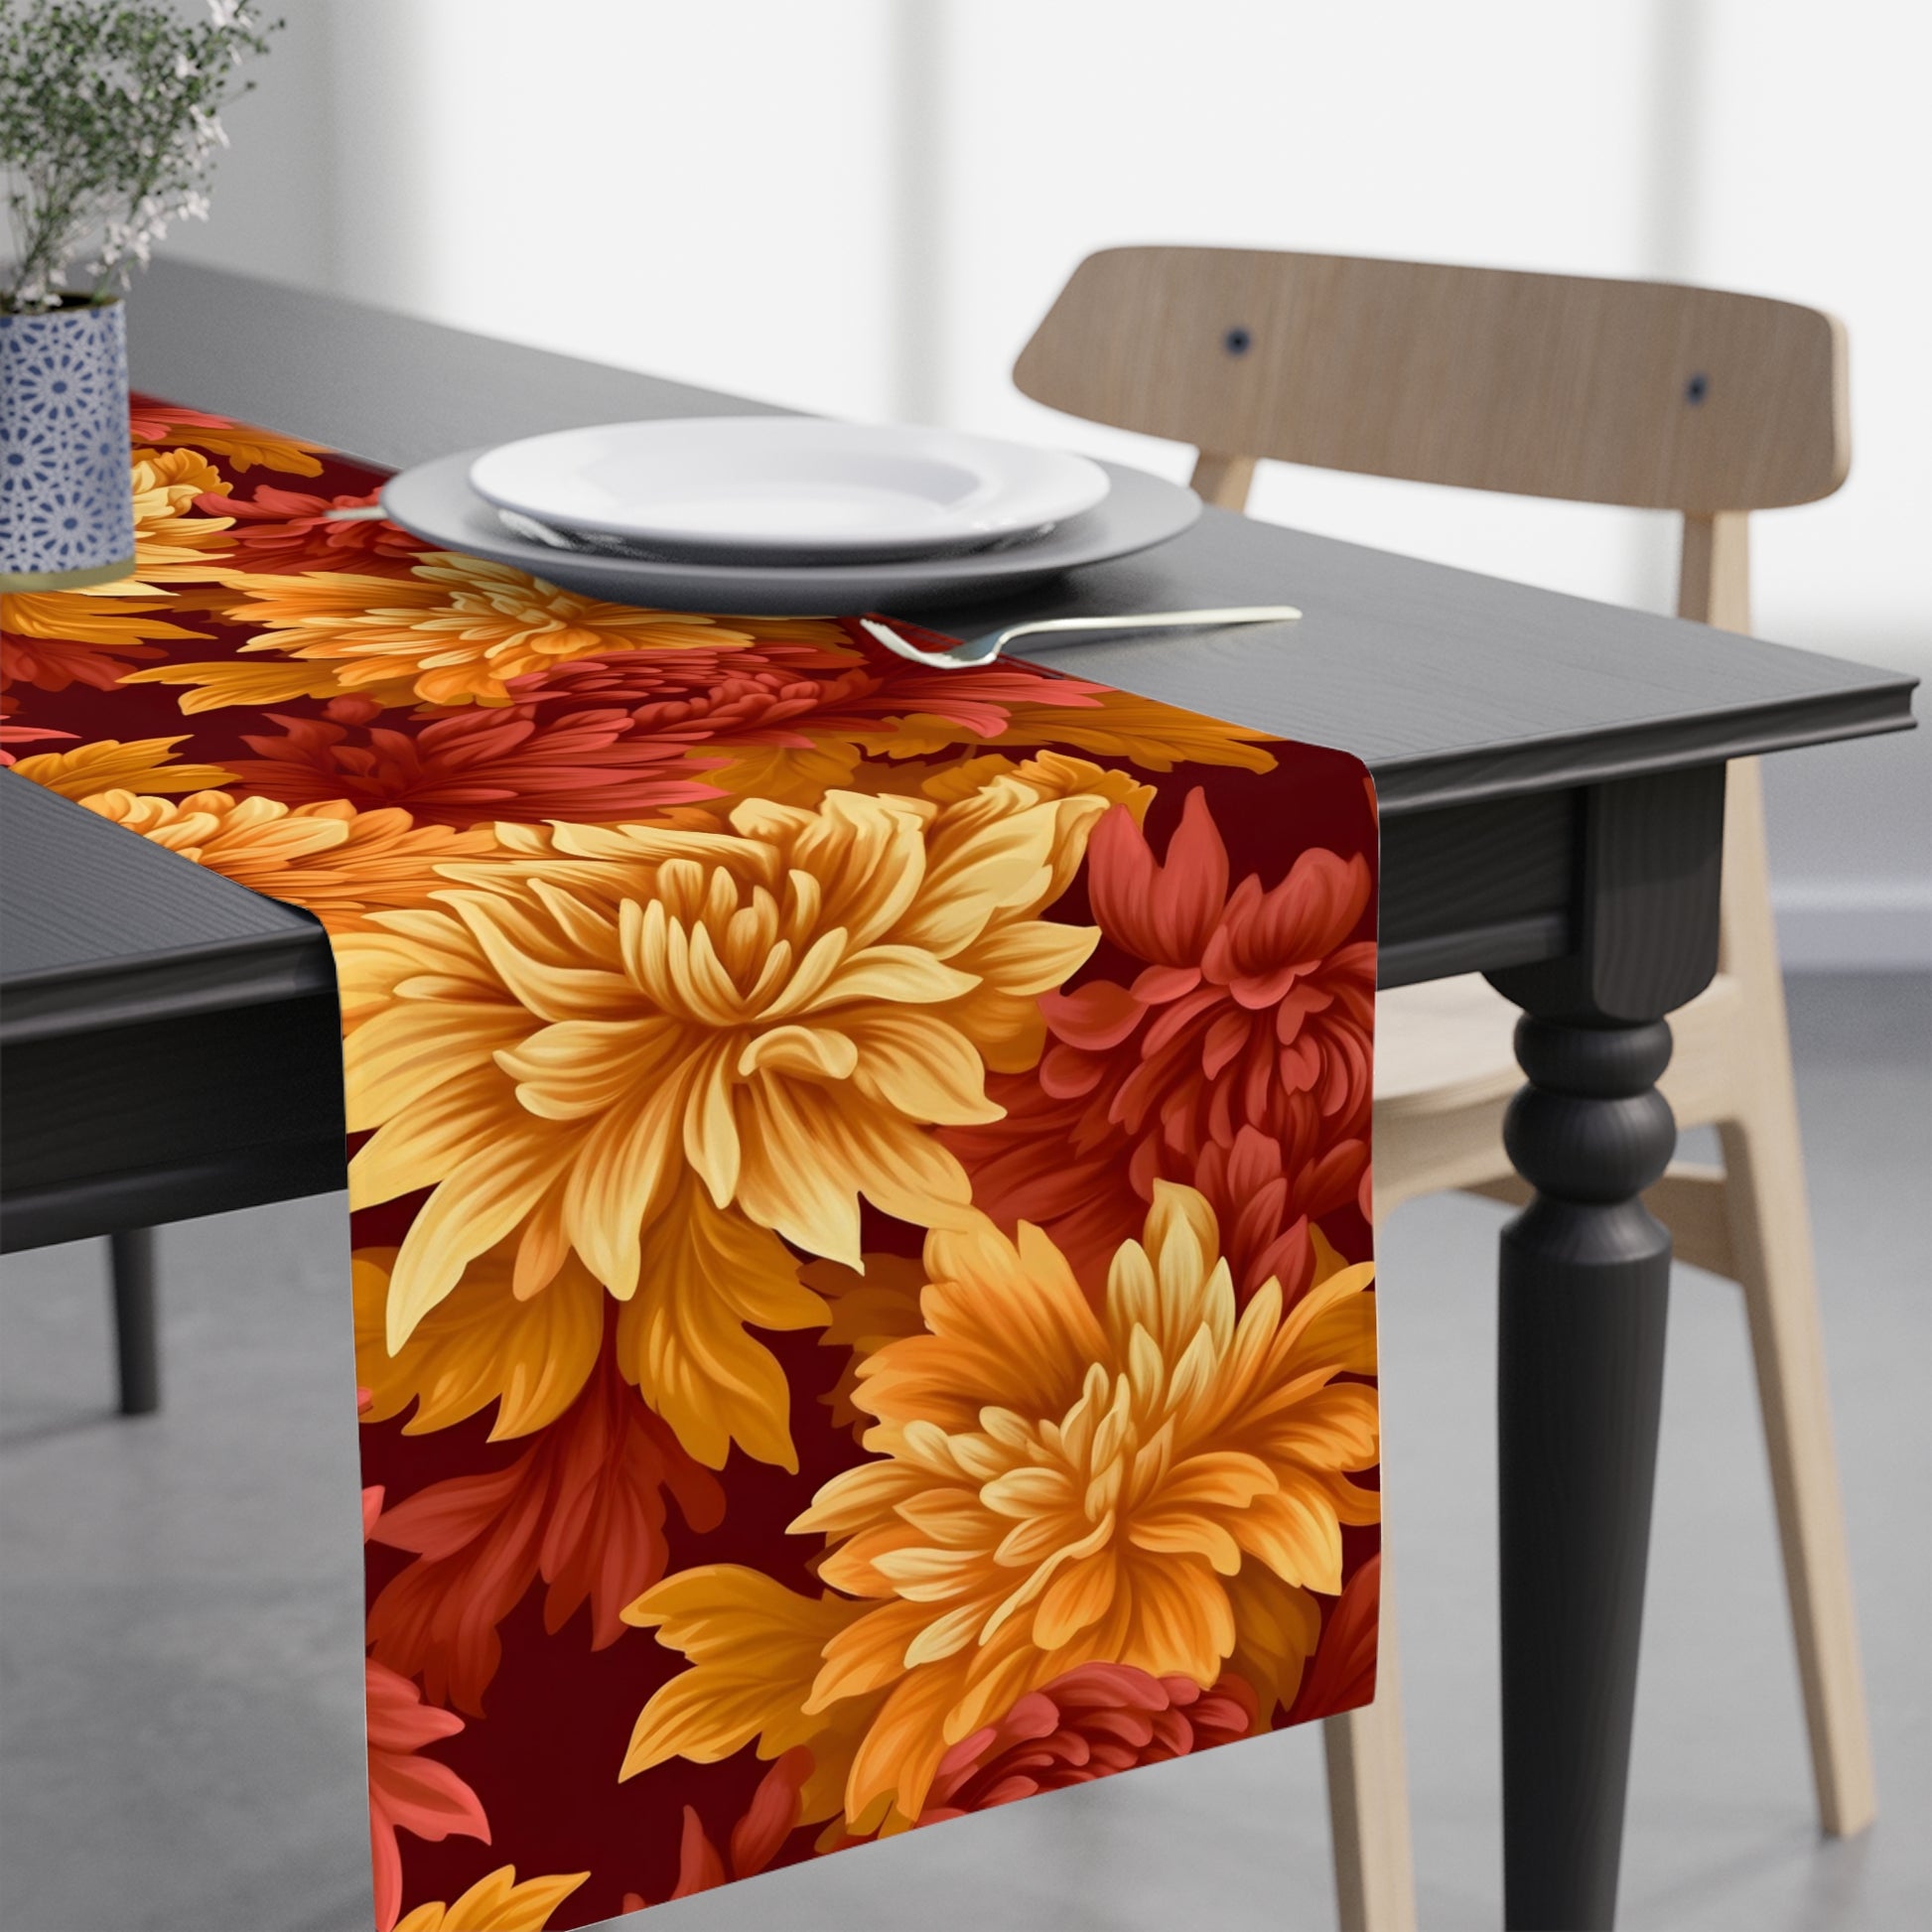 fall dahlia flower table runner with yellow, orange and brown fall color print